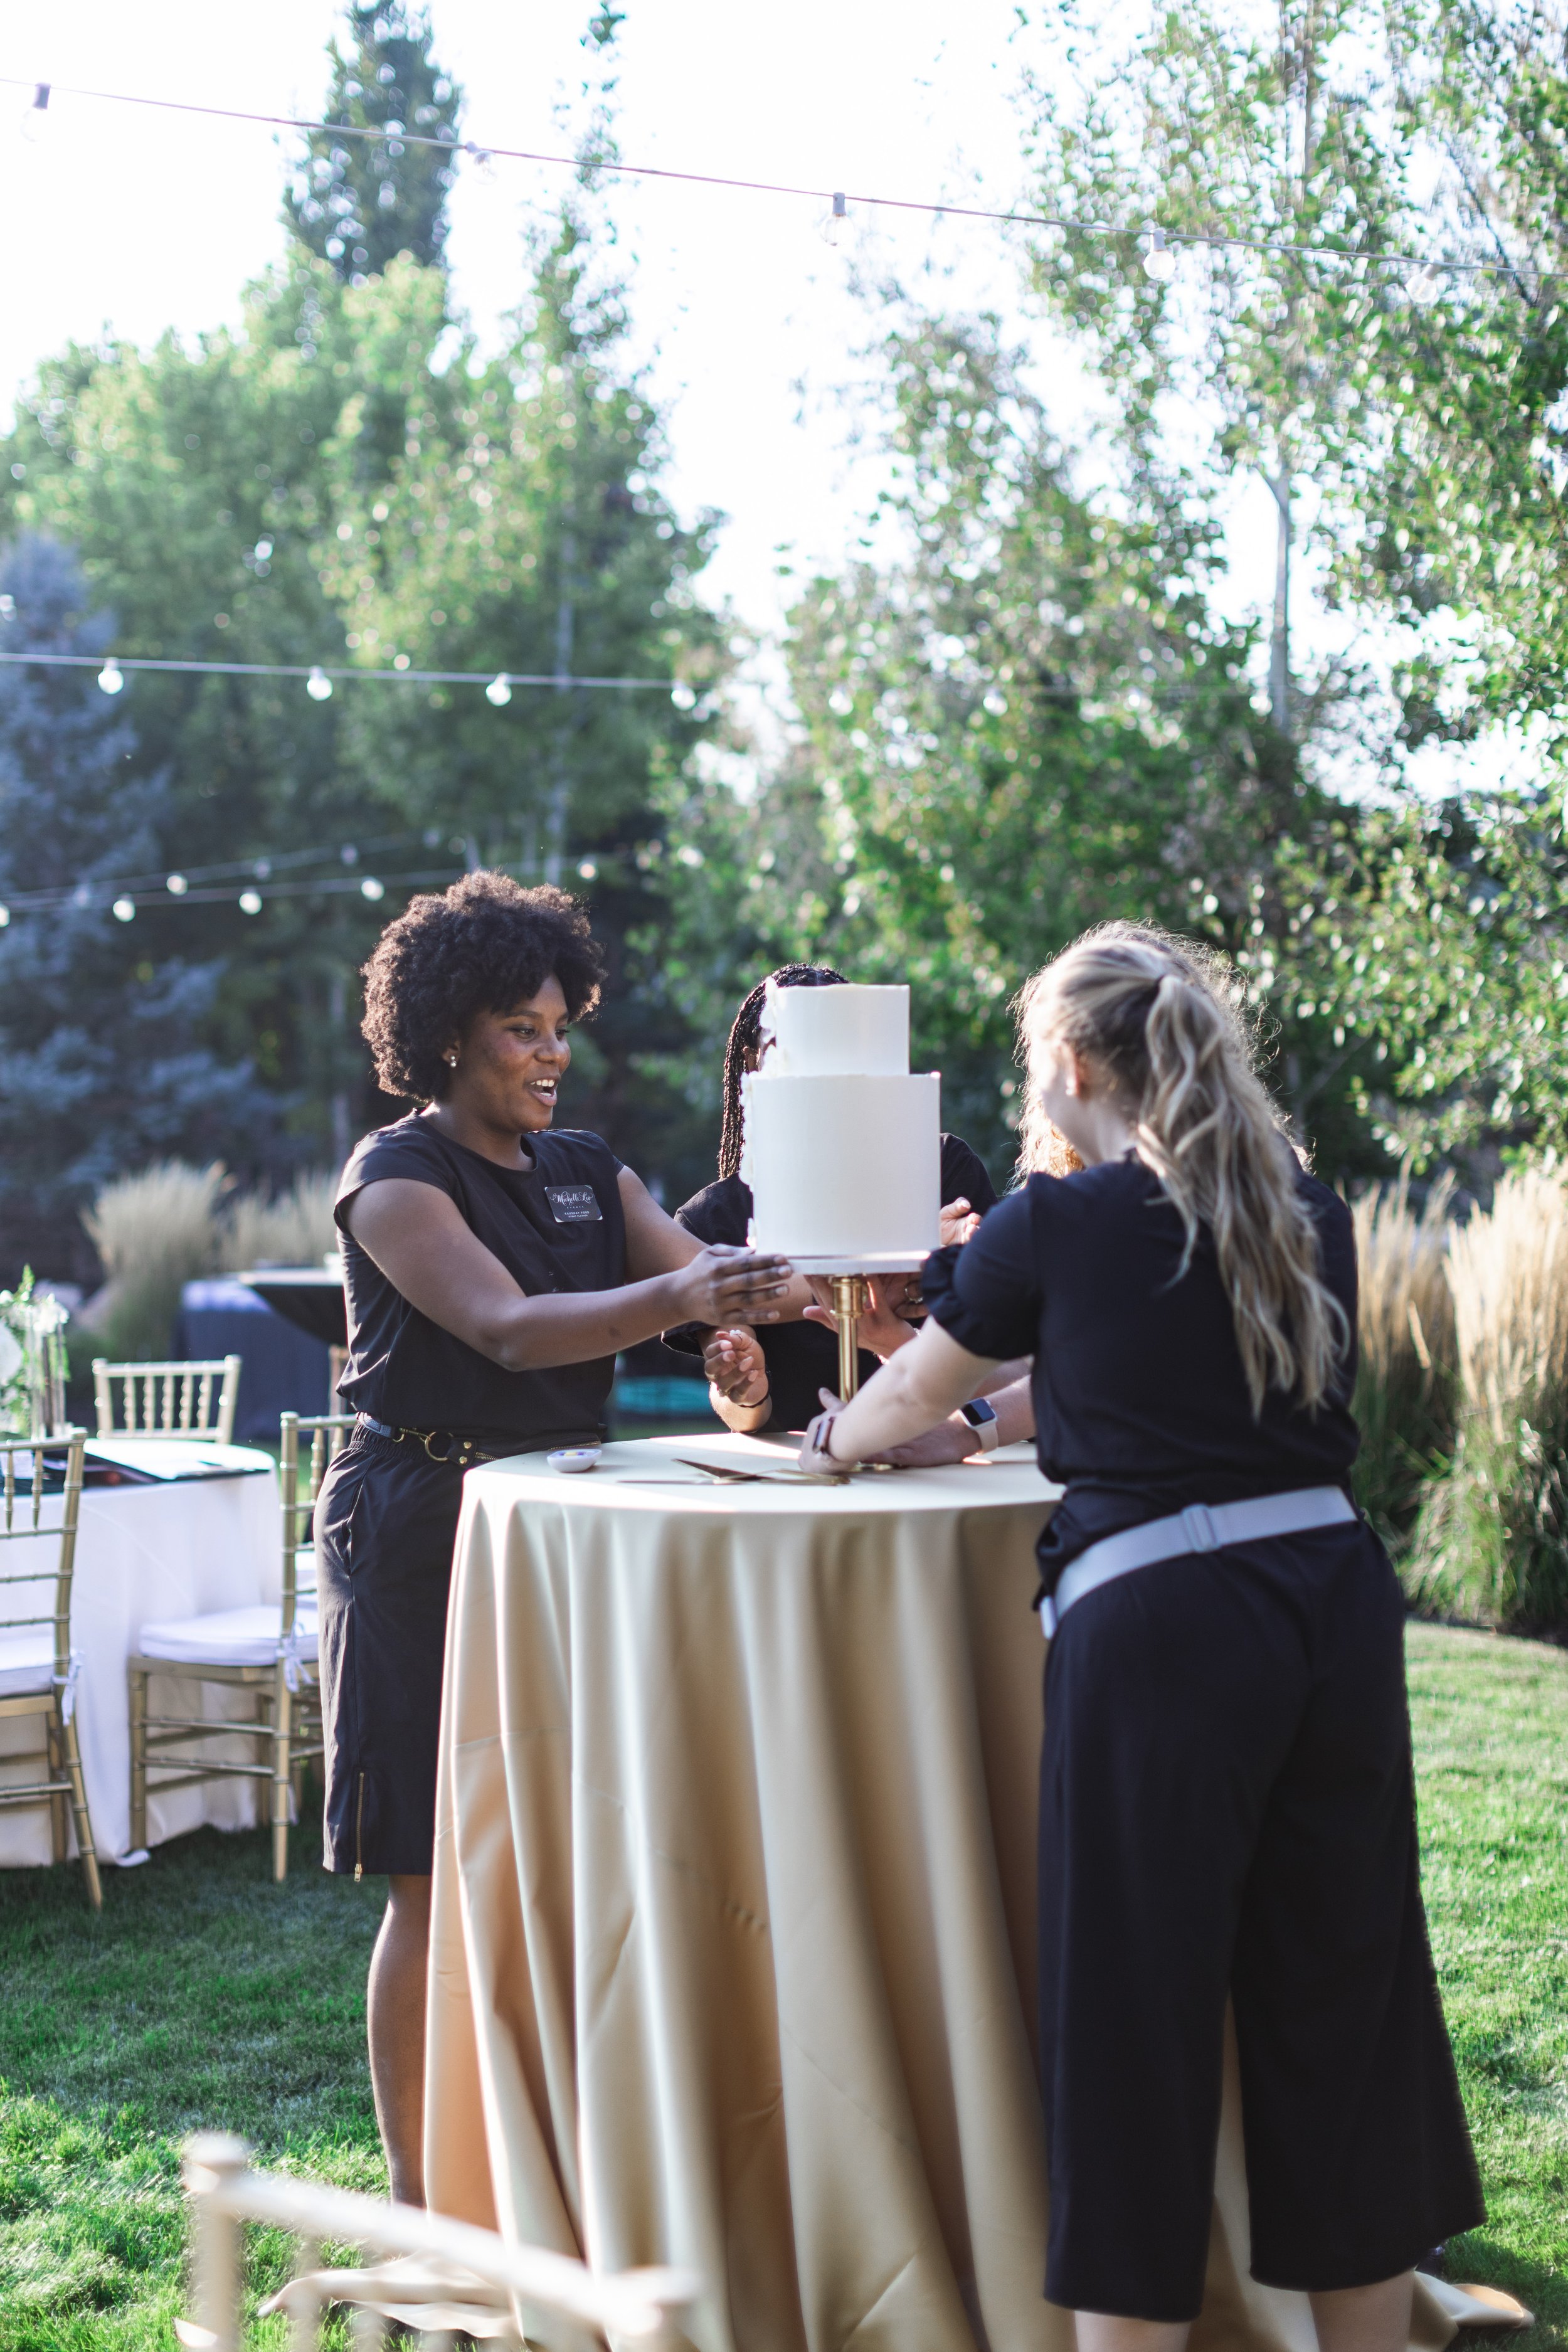  A wedding planner sets up cake with the cake decorator by Savanna Richardson Photography. wedding planners smooth wedding details #savannarichardsonphotography #weddingplannervsvenuecooridnator #weddingphotographer #weddingphotographersUtah 